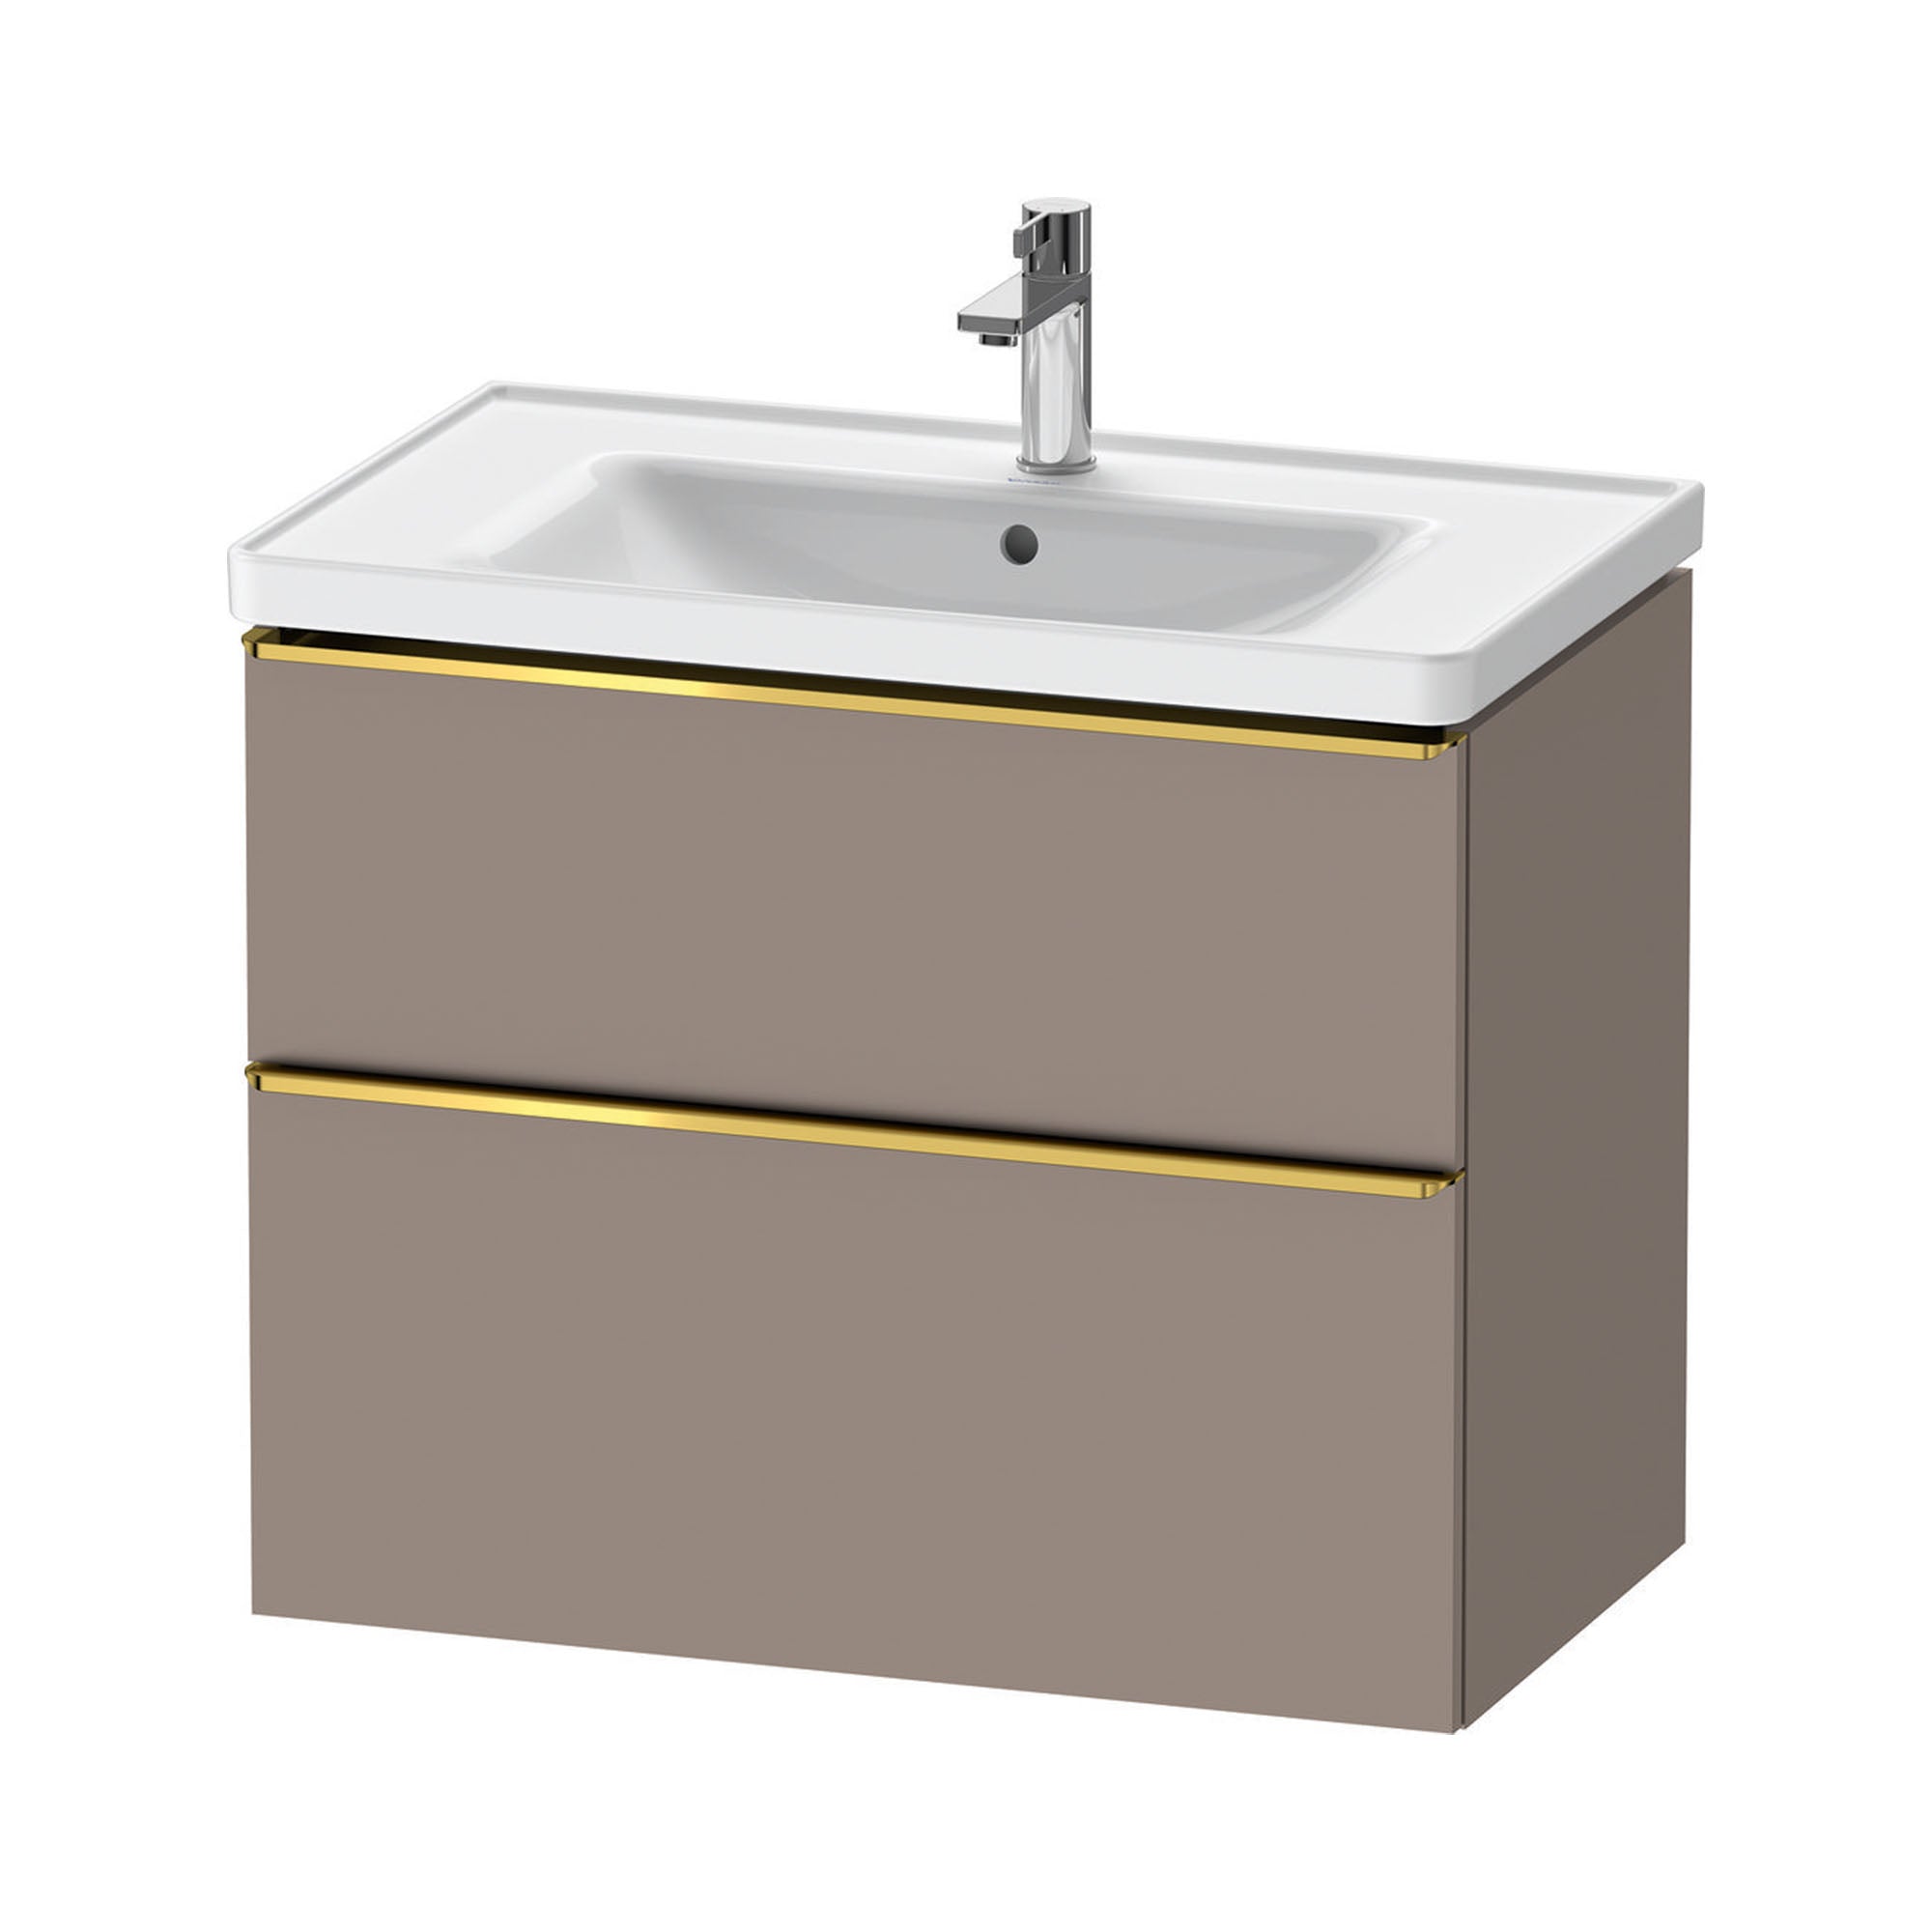 duravit d-neo 800mm wall mounted vanity unit with d-neo basin basalt gold handles